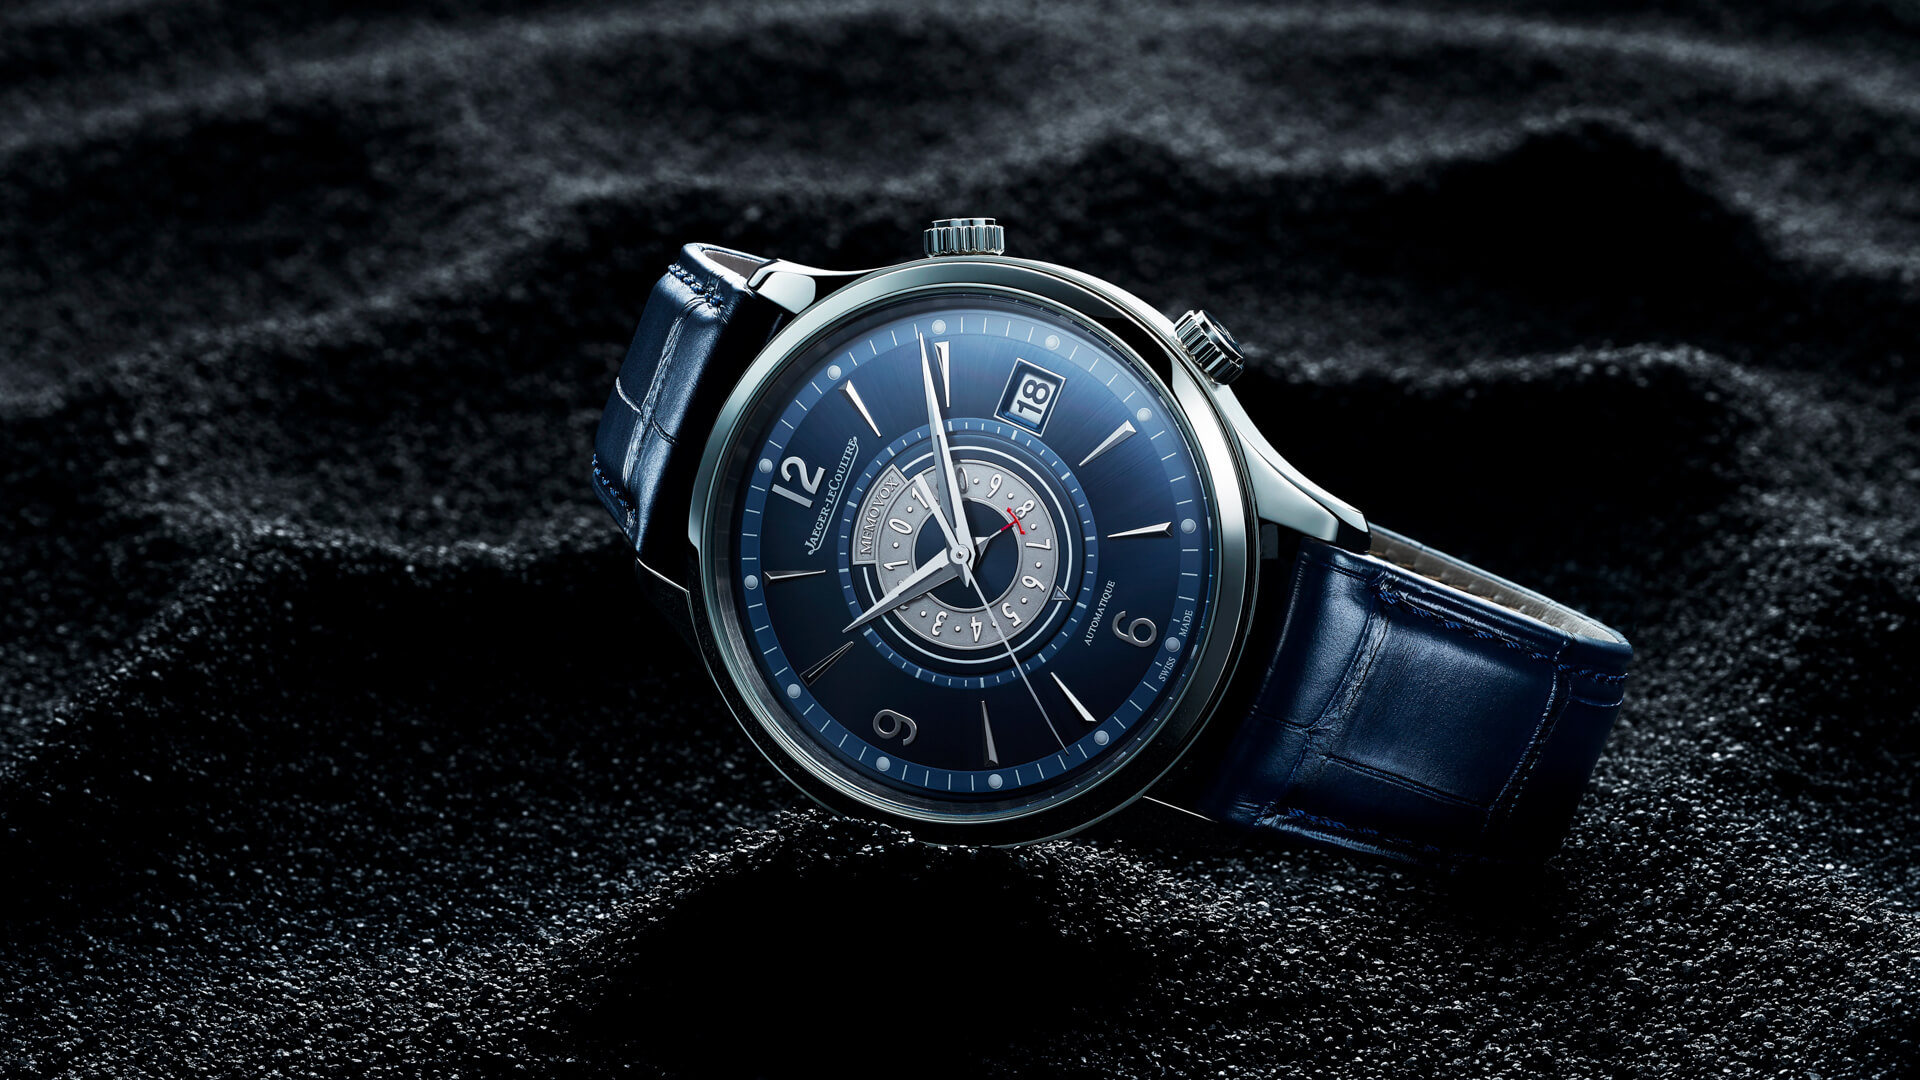 Jaeger-LeCoultre Introduces Updated Master Control Memovox Watches With New Functionality